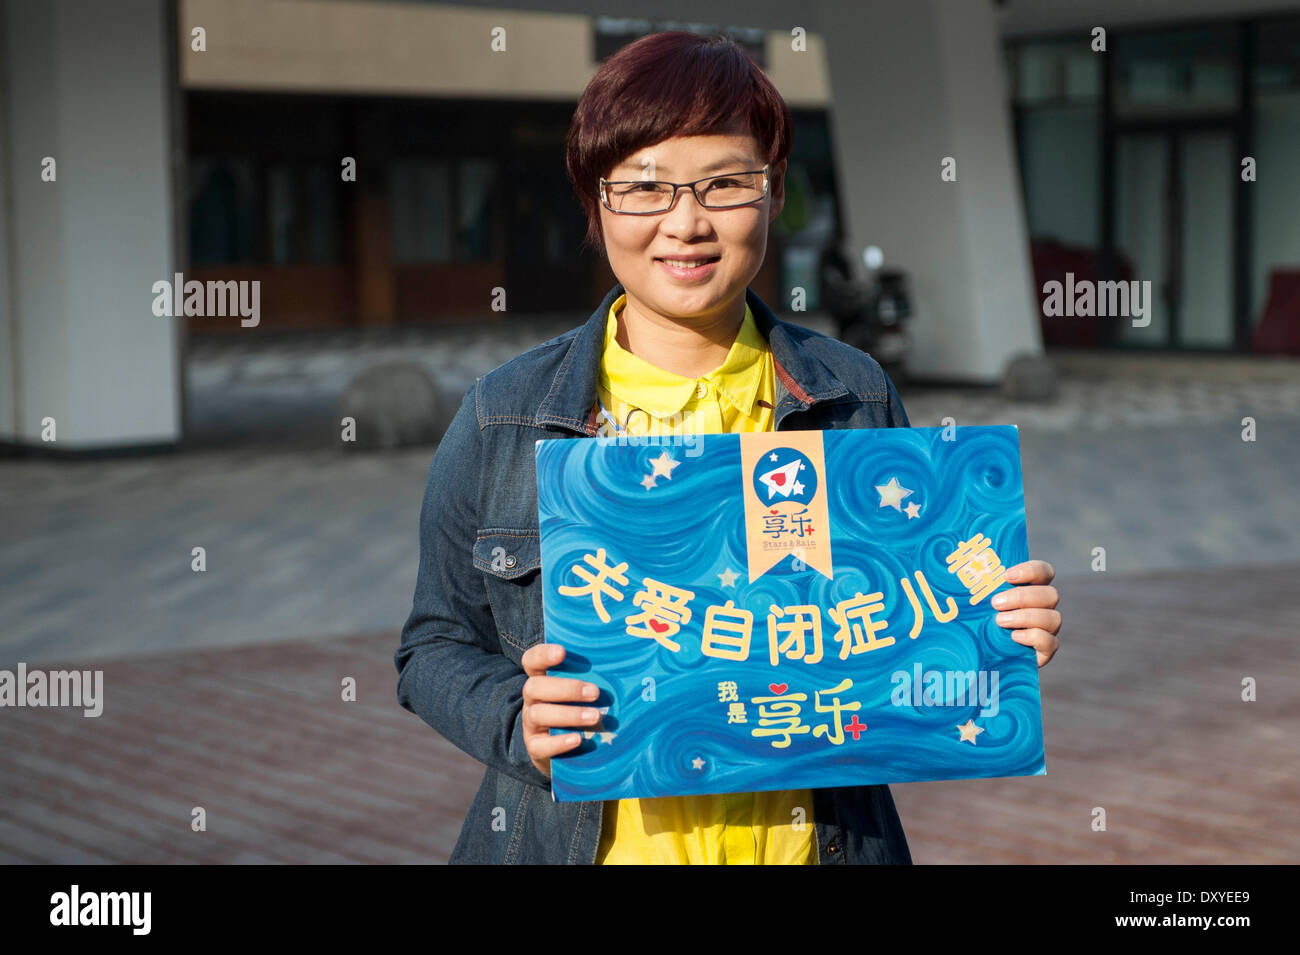 (140402) -- BEIJING, April 2, 2014 (Xinhua) -- Liang Hong, a volunteer for autistic children, holds a placard reading 'care for autistic children' in Beijing, capital of China, March 15, 2014. The World Autism Awareness Day falls on April 2, drawing attention to the pervasive developmental disorder that affects tens of millions of children around the globe.    (Xinhua/Zhang Keren) (wf) Stock Photo